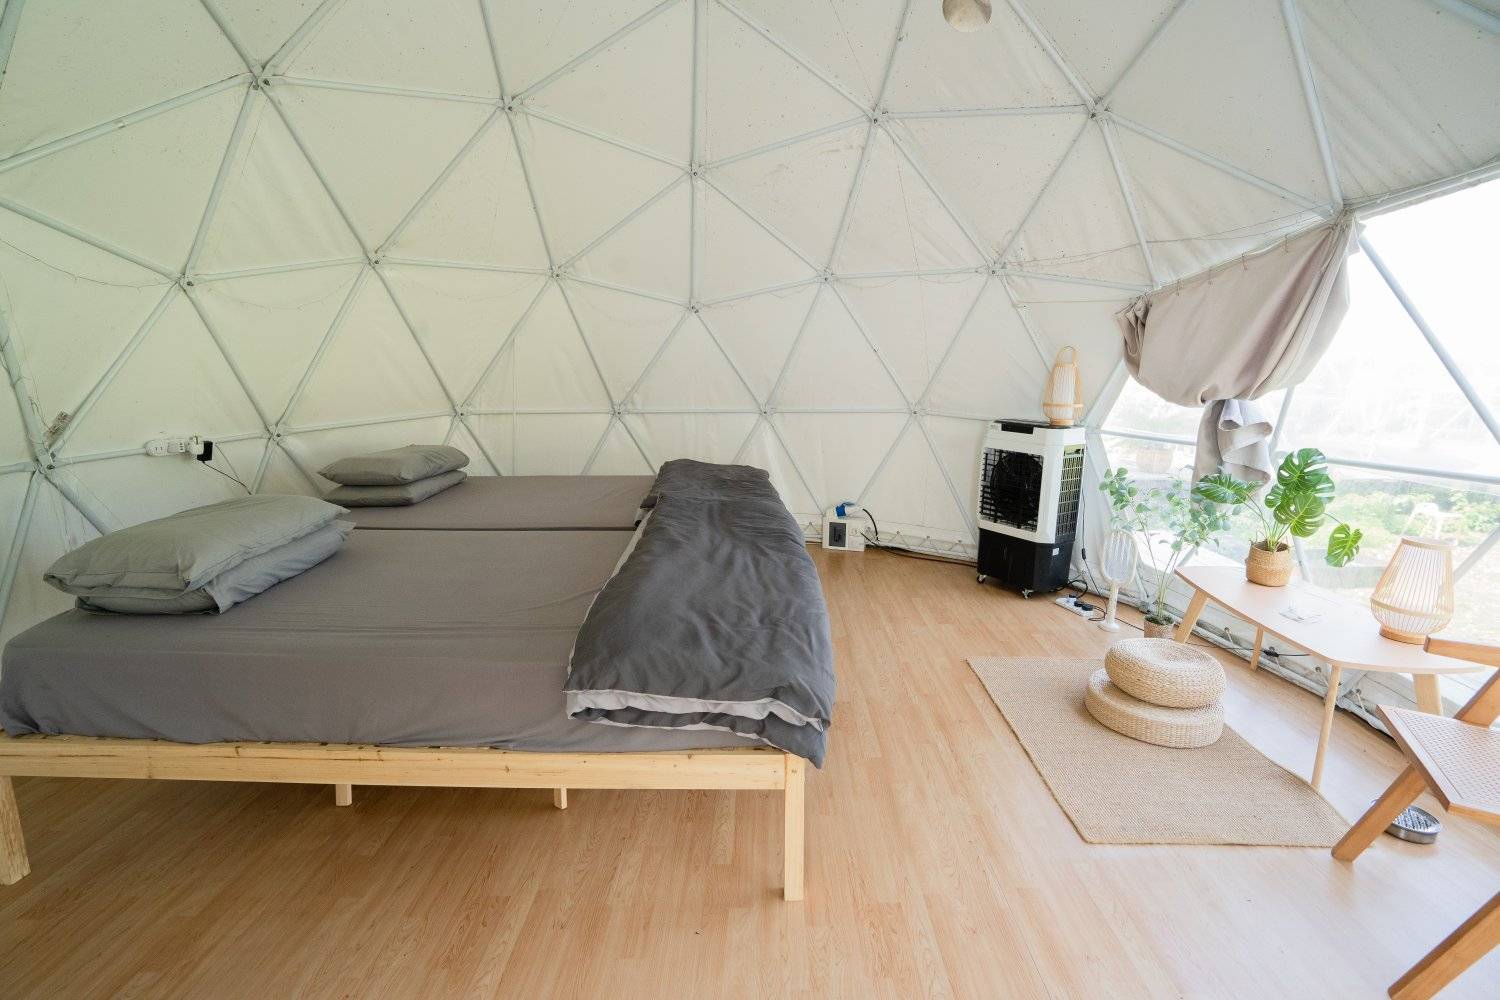 Nomad Terrace - Dome & Bell Tent & Glamping Tent 【Private Platform】 5M Dome Tent  (4 pax) - Zone D terraced area｜Nomad Terrance 7